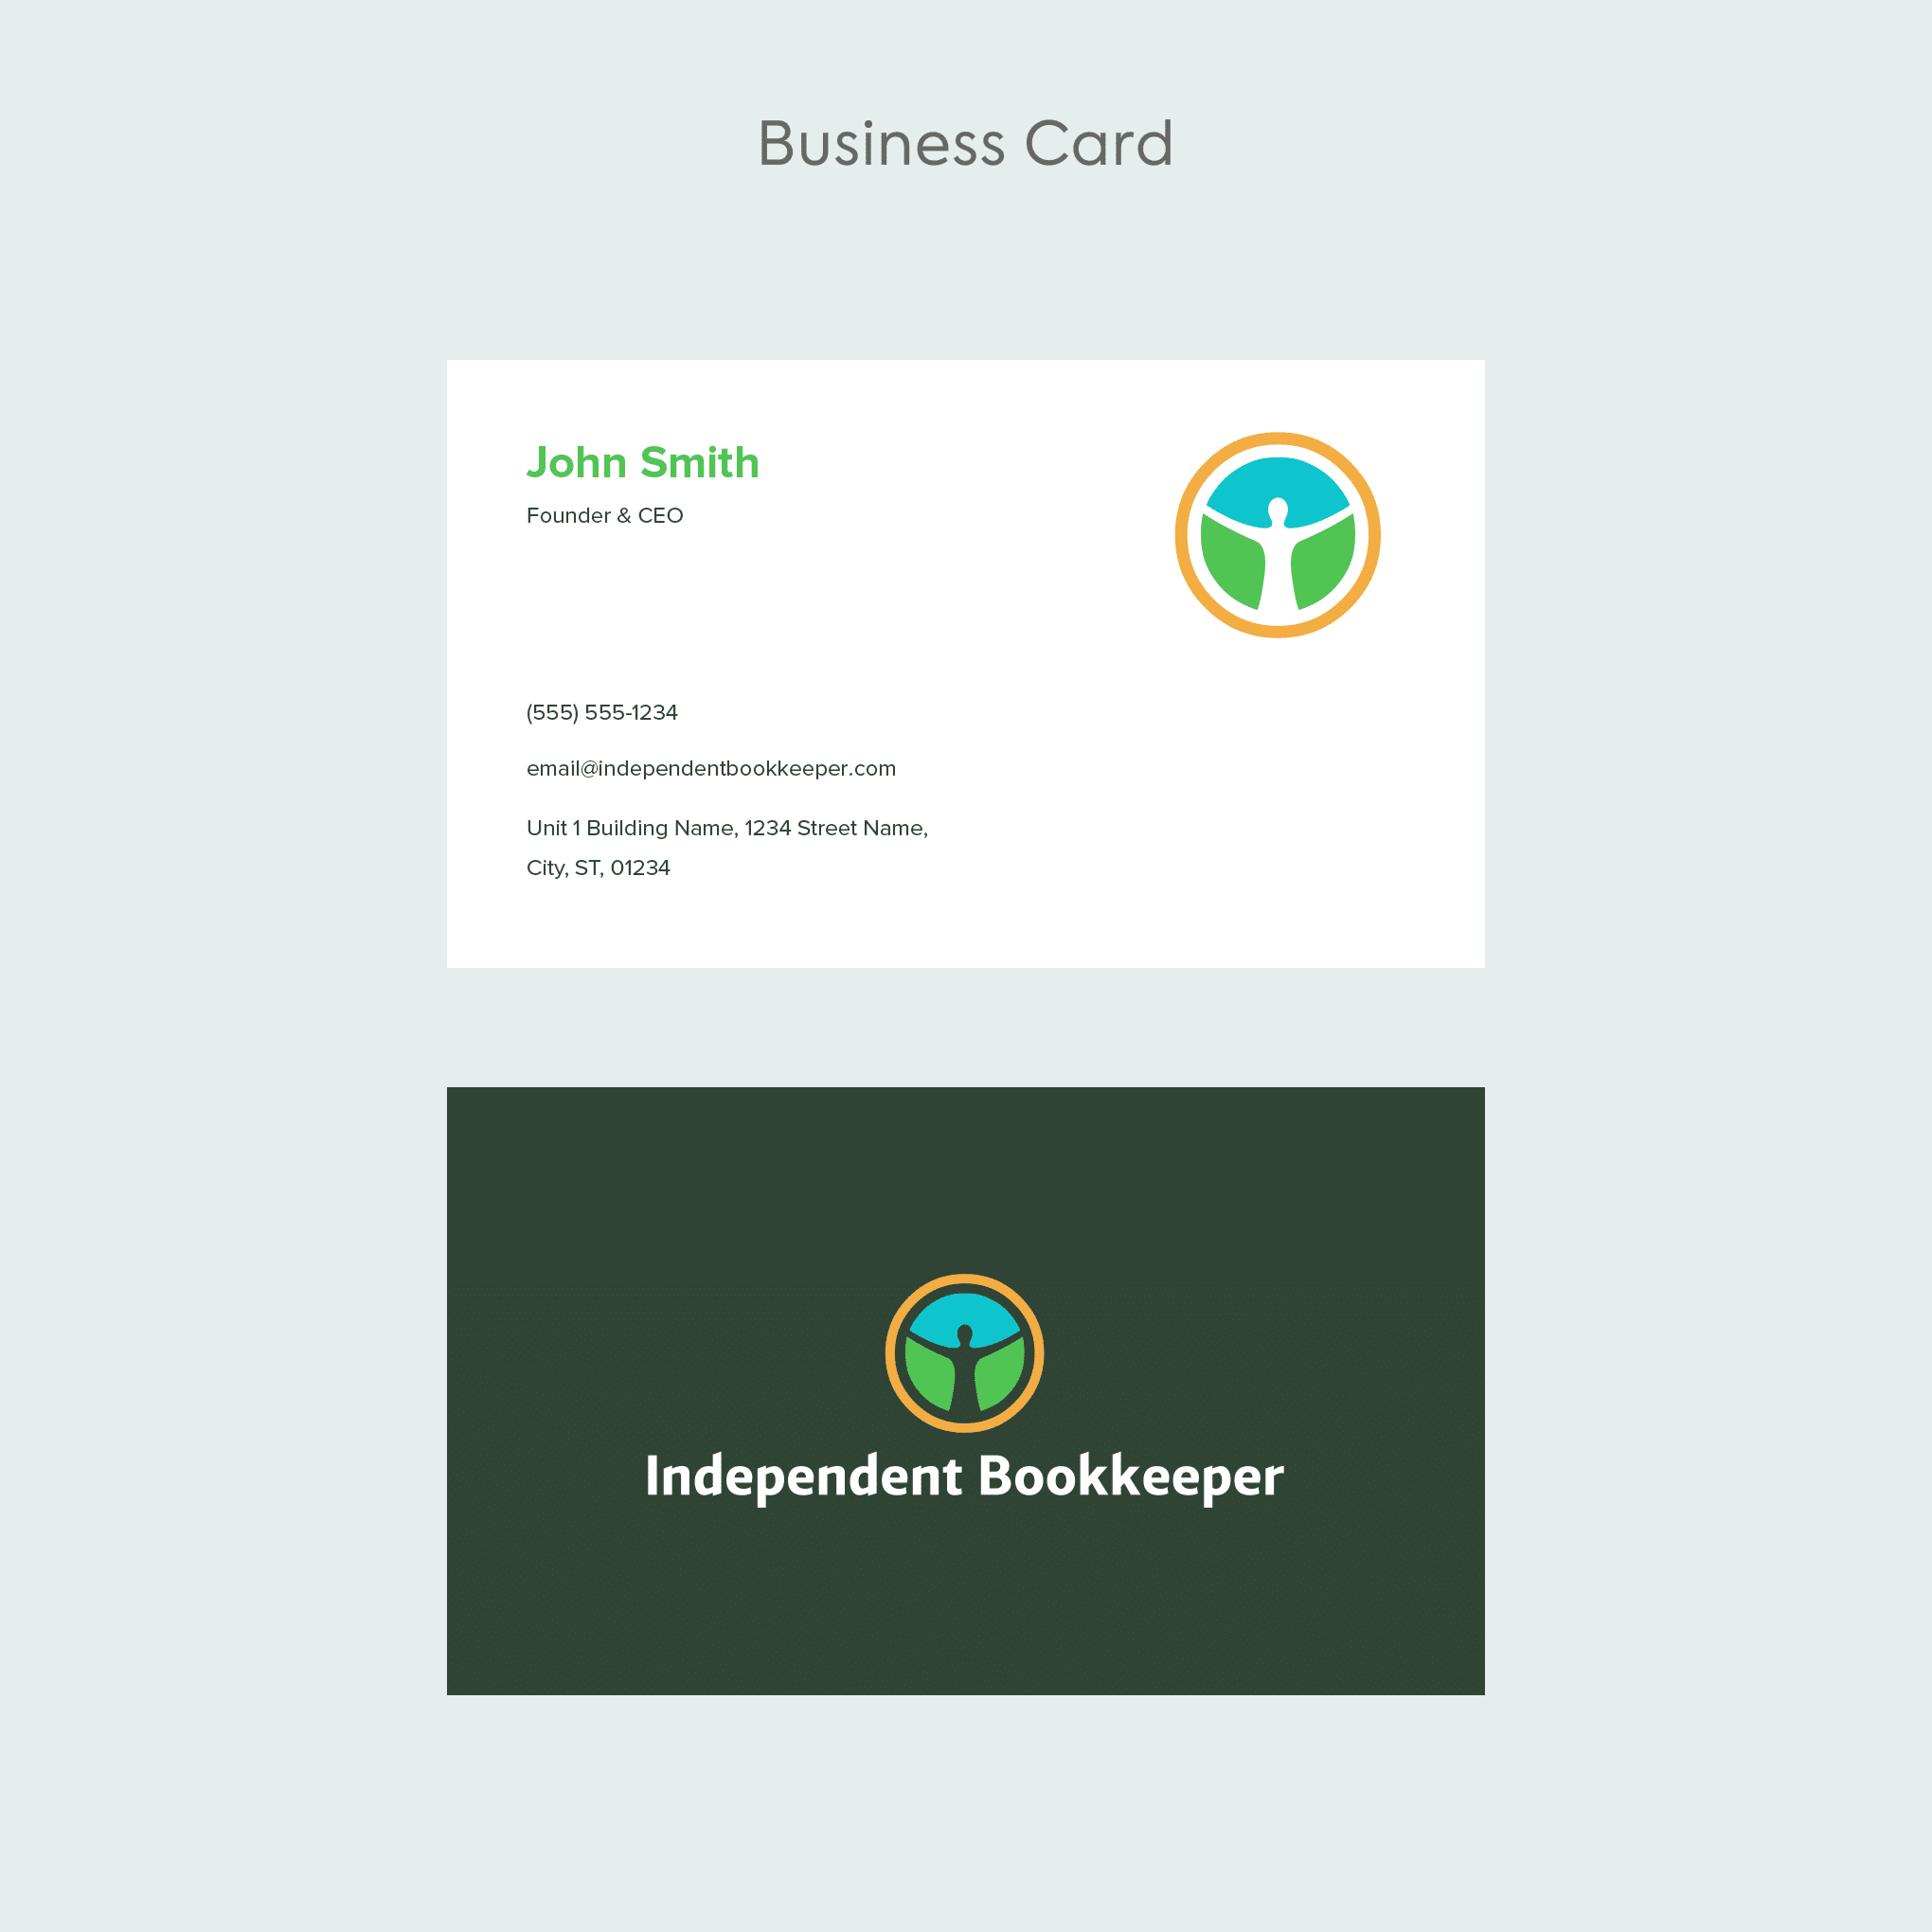 04 - Business Card Template (7)